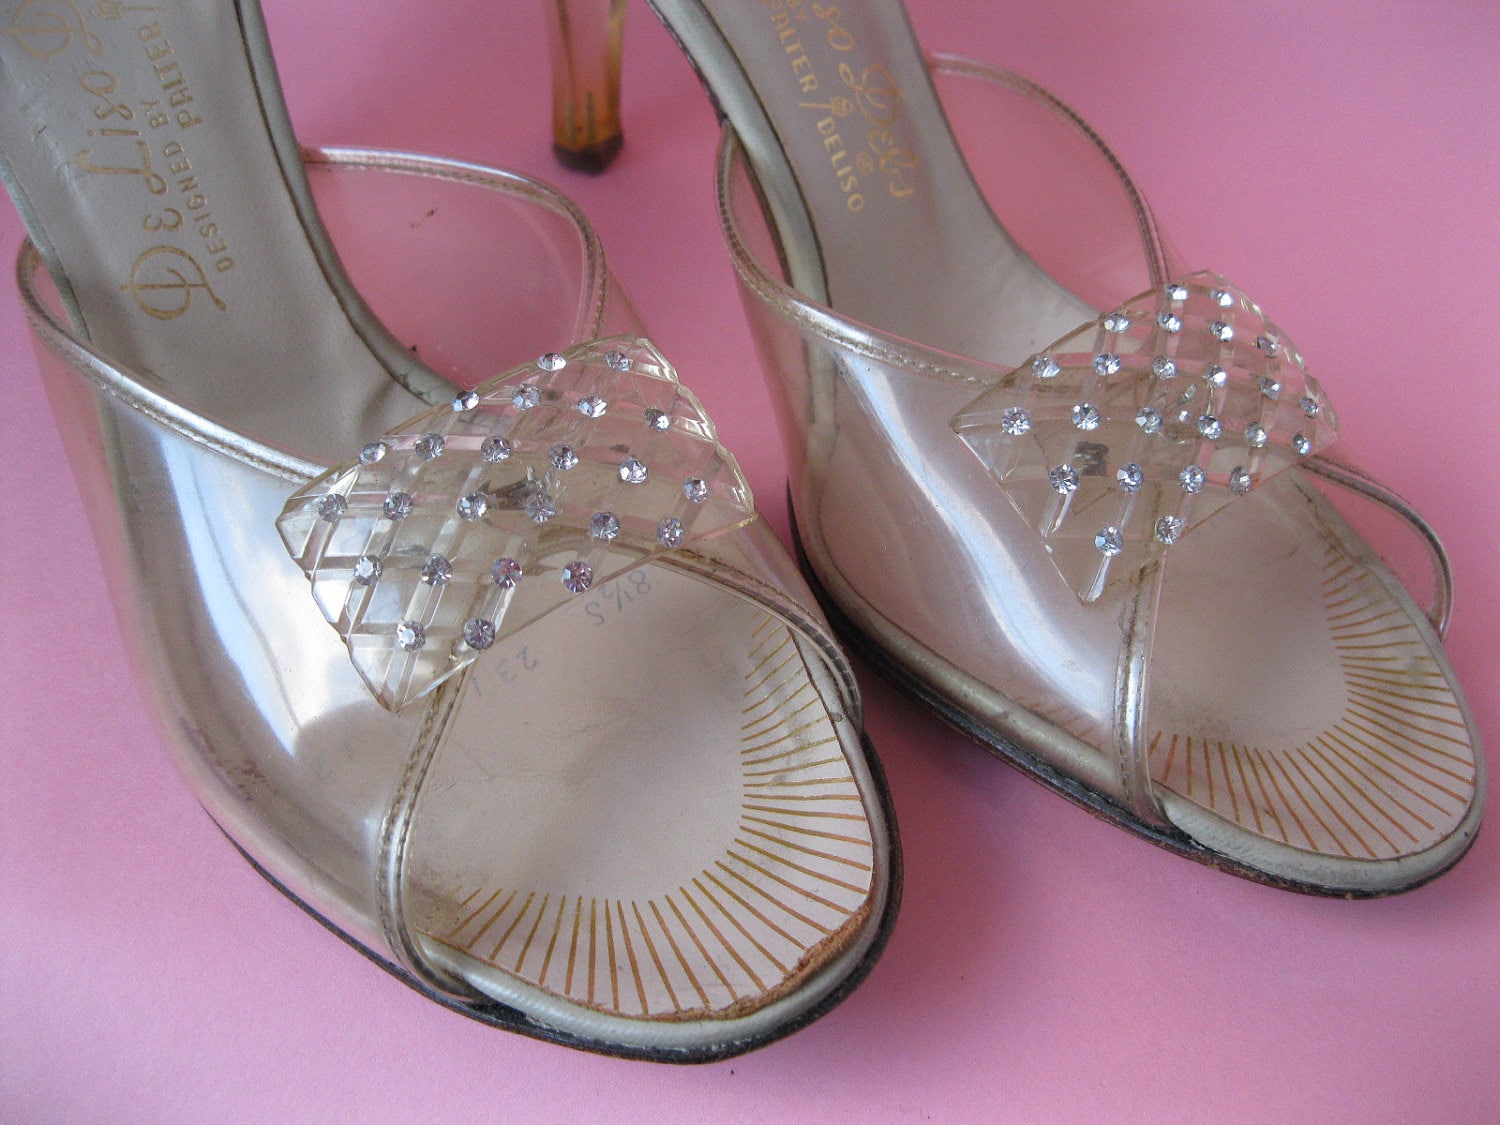 Vintage 1950s Lucite Shoes De Liso Debs by unionmadebride on Etsy